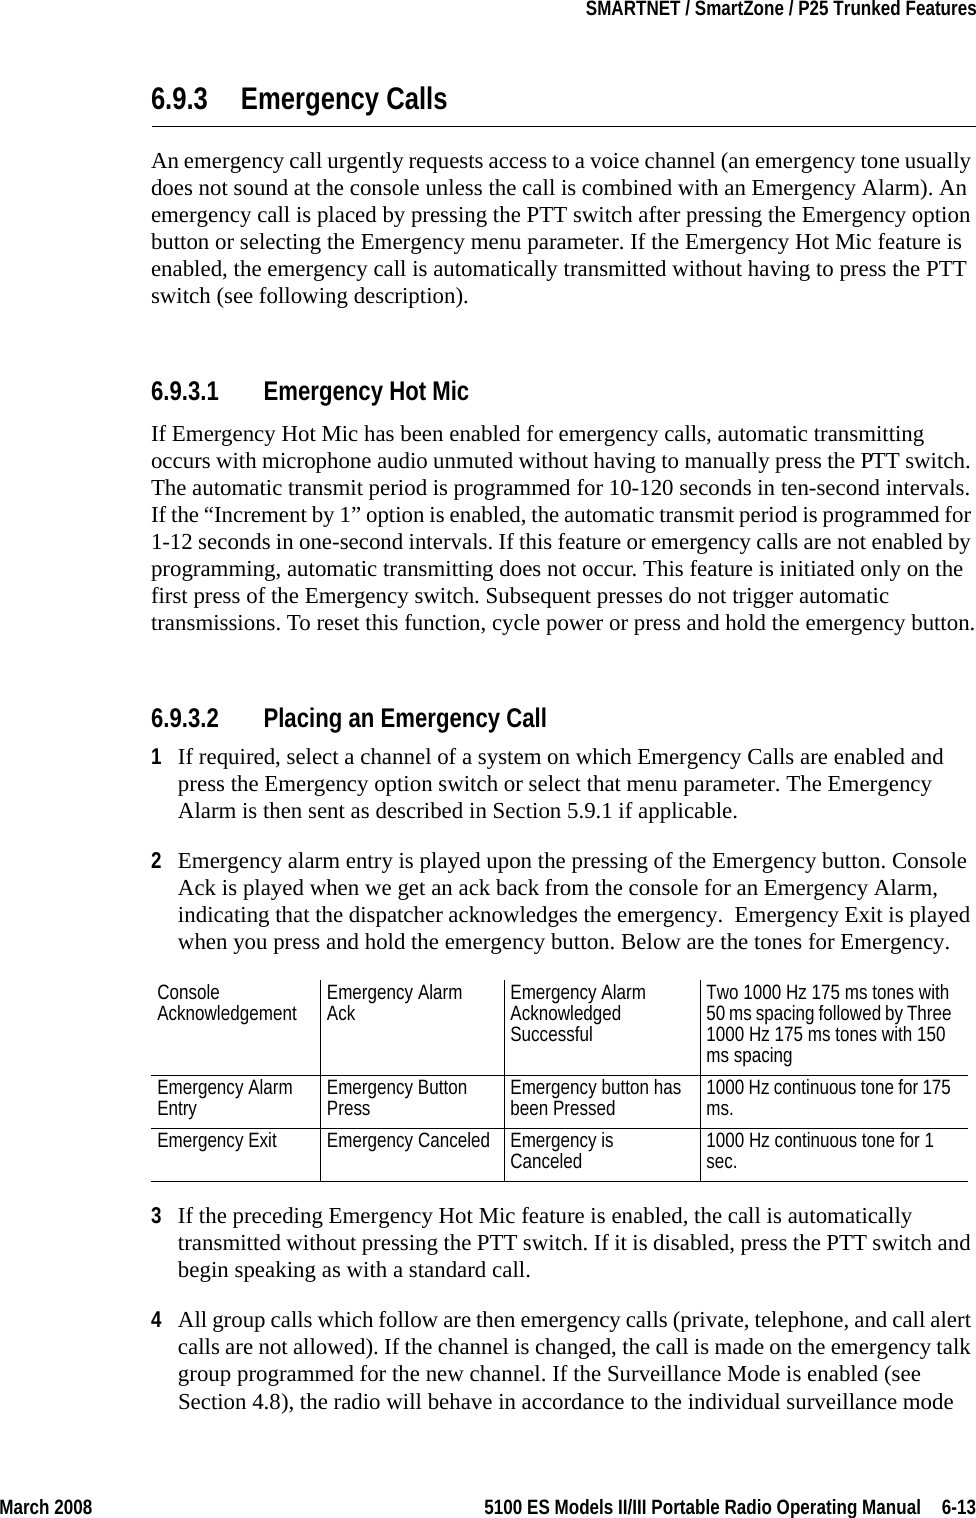 March 2008 5100 ES Models II/III Portable Radio Operating Manual  6-13SMARTNET / SmartZone / P25 Trunked Features6.9.3 Emergency CallsAn emergency call urgently requests access to a voice channel (an emergency tone usually does not sound at the console unless the call is combined with an Emergency Alarm). An emergency call is placed by pressing the PTT switch after pressing the Emergency option button or selecting the Emergency menu parameter. If the Emergency Hot Mic feature is enabled, the emergency call is automatically transmitted without having to press the PTT switch (see following description).6.9.3.1 Emergency Hot MicIf Emergency Hot Mic has been enabled for emergency calls, automatic transmitting occurs with microphone audio unmuted without having to manually press the PTT switch. The automatic transmit period is programmed for 10-120 seconds in ten-second intervals. If the “Increment by 1” option is enabled, the automatic transmit period is programmed for 1-12 seconds in one-second intervals. If this feature or emergency calls are not enabled by programming, automatic transmitting does not occur. This feature is initiated only on the first press of the Emergency switch. Subsequent presses do not trigger automatic transmissions. To reset this function, cycle power or press and hold the emergency button.6.9.3.2 Placing an Emergency Call1If required, select a channel of a system on which Emergency Calls are enabled and press the Emergency option switch or select that menu parameter. The Emergency Alarm is then sent as described in Section 5.9.1 if applicable.2Emergency alarm entry is played upon the pressing of the Emergency button. Console Ack is played when we get an ack back from the console for an Emergency Alarm, indicating that the dispatcher acknowledges the emergency.  Emergency Exit is played when you press and hold the emergency button. Below are the tones for Emergency. 3If the preceding Emergency Hot Mic feature is enabled, the call is automatically transmitted without pressing the PTT switch. If it is disabled, press the PTT switch and begin speaking as with a standard call.4All group calls which follow are then emergency calls (private, telephone, and call alert calls are not allowed). If the channel is changed, the call is made on the emergency talk group programmed for the new channel. If the Surveillance Mode is enabled (see Section 4.8), the radio will behave in accordance to the individual surveillance mode Console Acknowledgement Emergency Alarm Ack Emergency Alarm Acknowledged SuccessfulTwo 1000 Hz 175 ms tones with 50 ms spacing followed by Three 1000 Hz 175 ms tones with 150 ms spacingEmergency Alarm Entry Emergency Button Press Emergency button has been Pressed 1000 Hz continuous tone for 175 ms.Emergency Exit Emergency Canceled Emergency is Canceled 1000 Hz continuous tone for 1 sec.